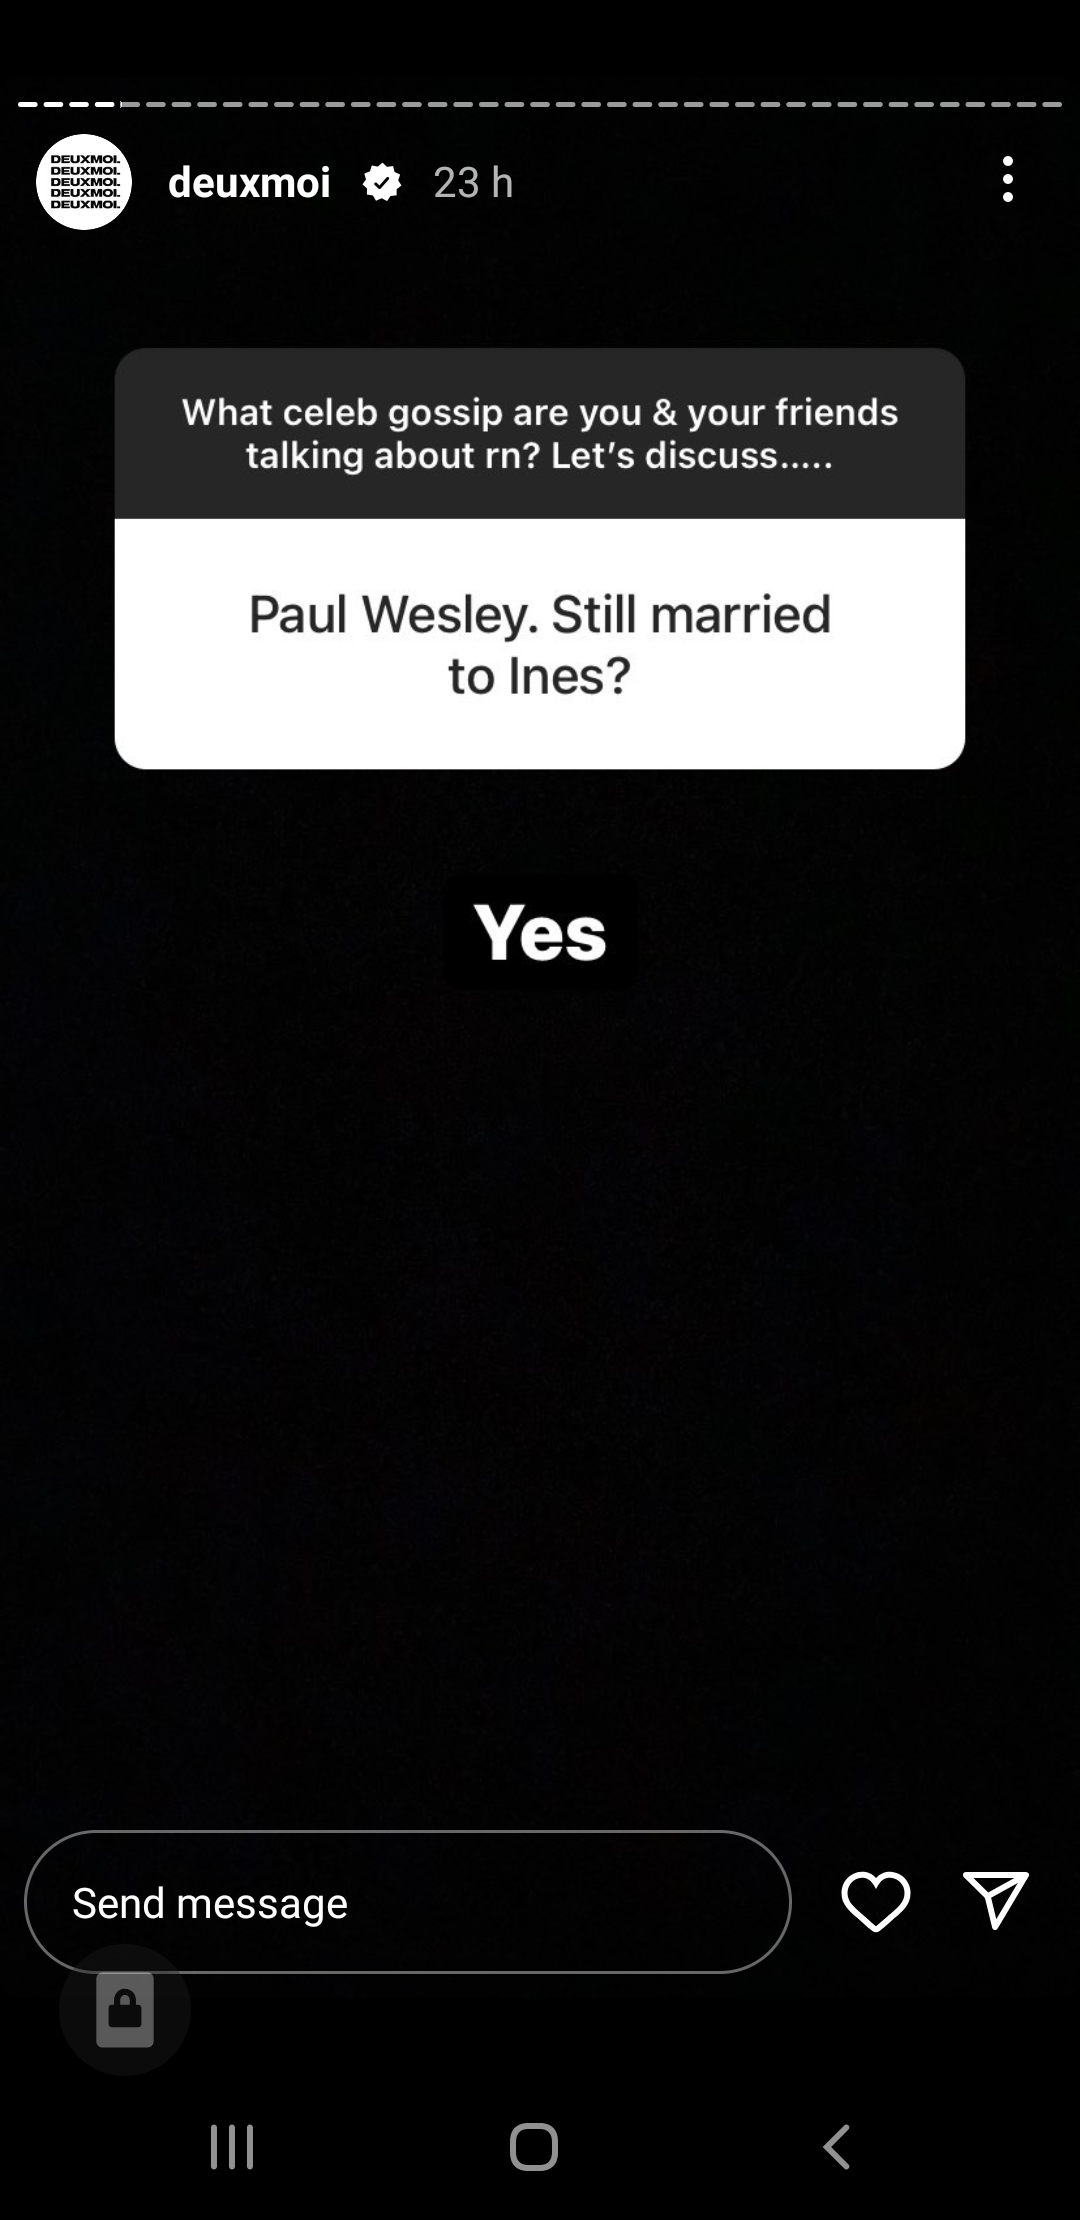 Deuxmoi confirmed that Paul Wesley had not split with his wife Ines de Ramon, and the couple was still married. 